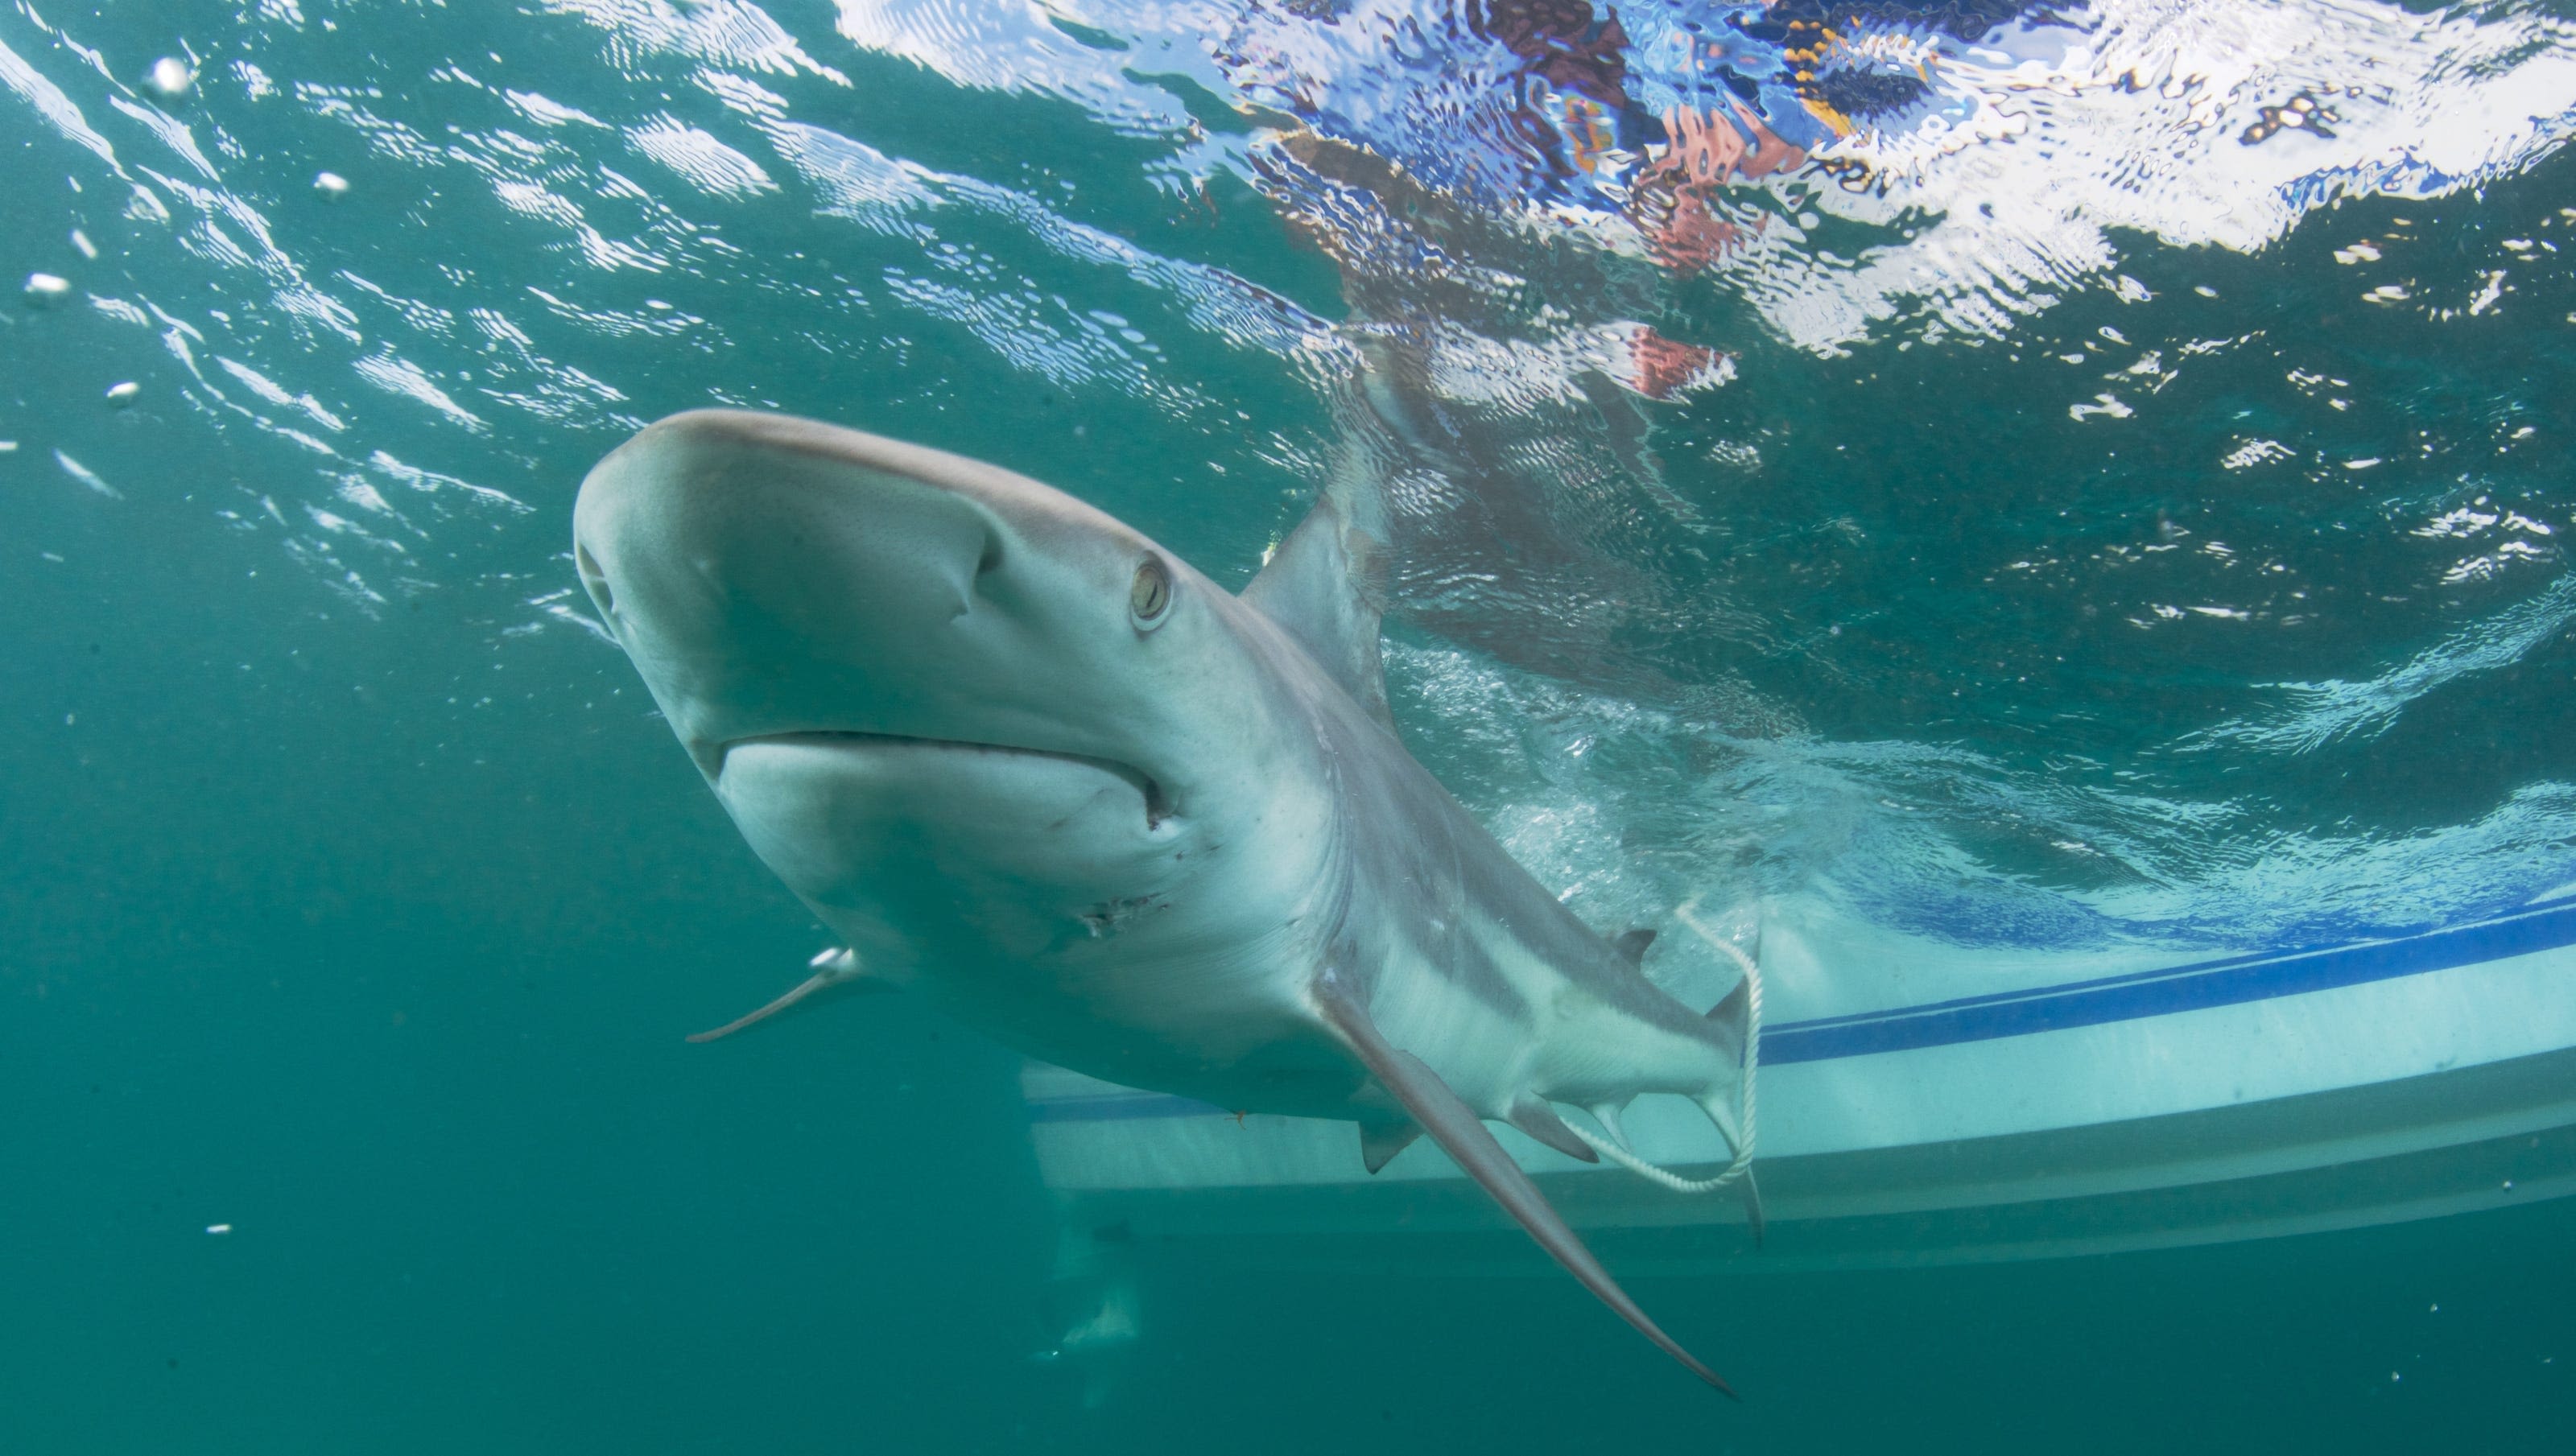 6 people encounter sharks in two days in Florida, Texas. Why so many? How to avoid bites